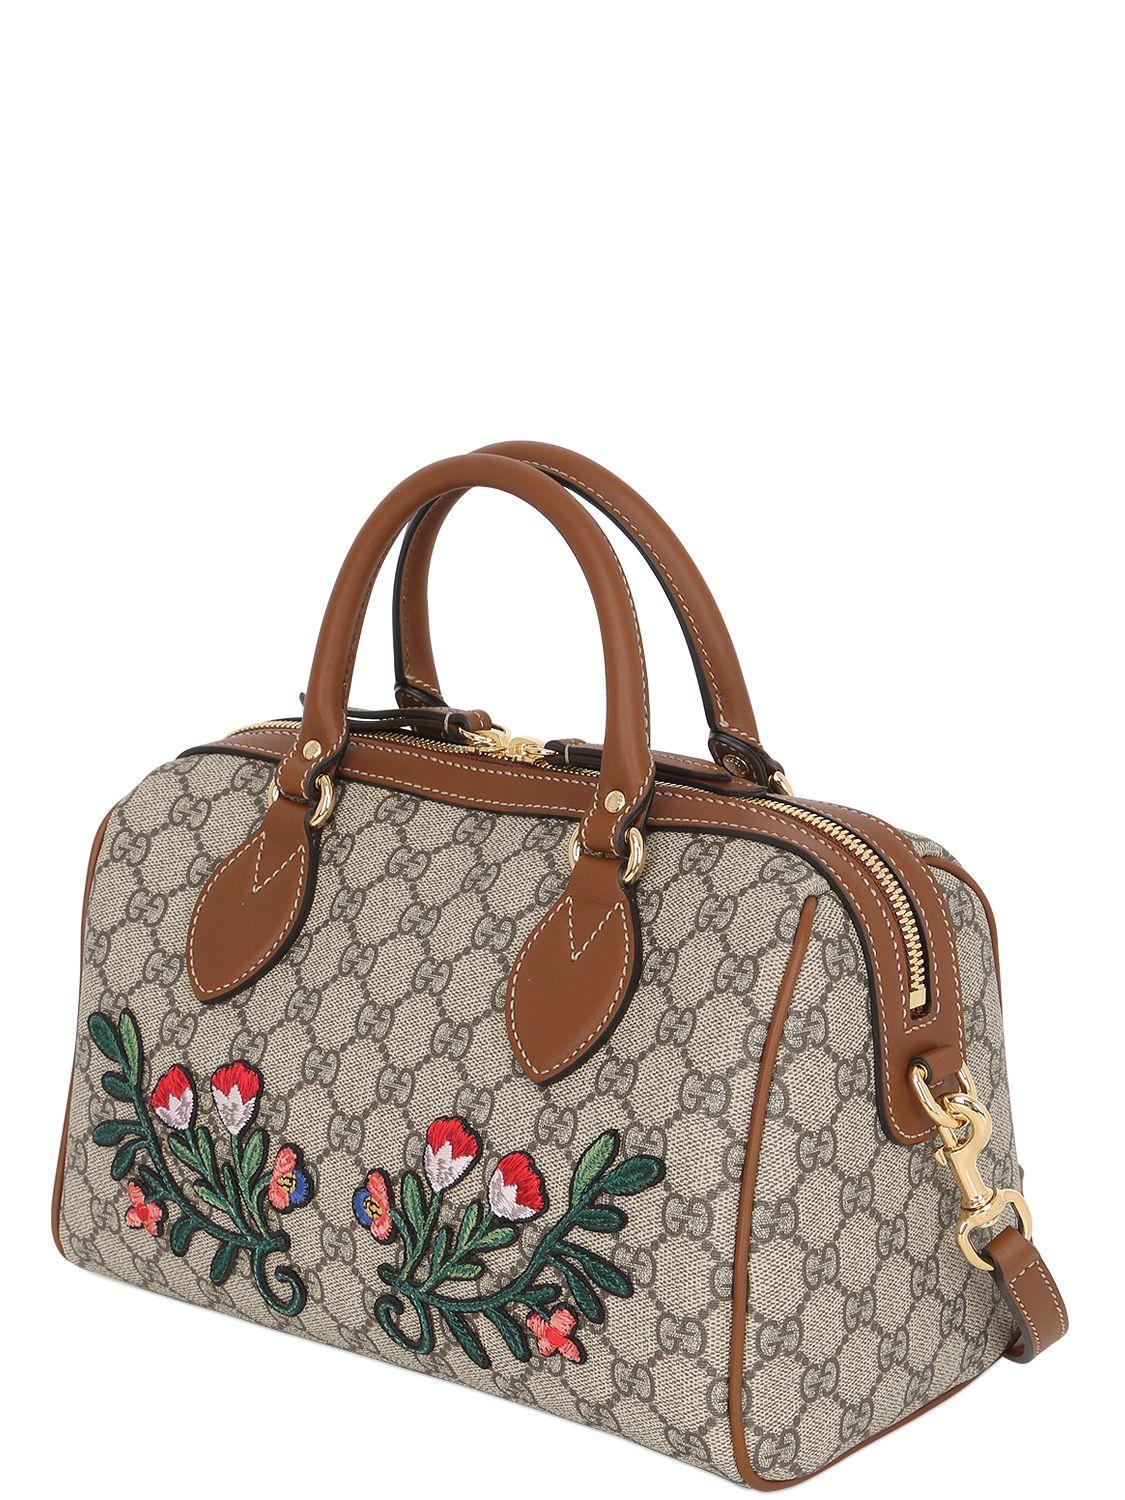 Lyst - Gucci Flower Patches Gg Supreme Top Handle Bag in White